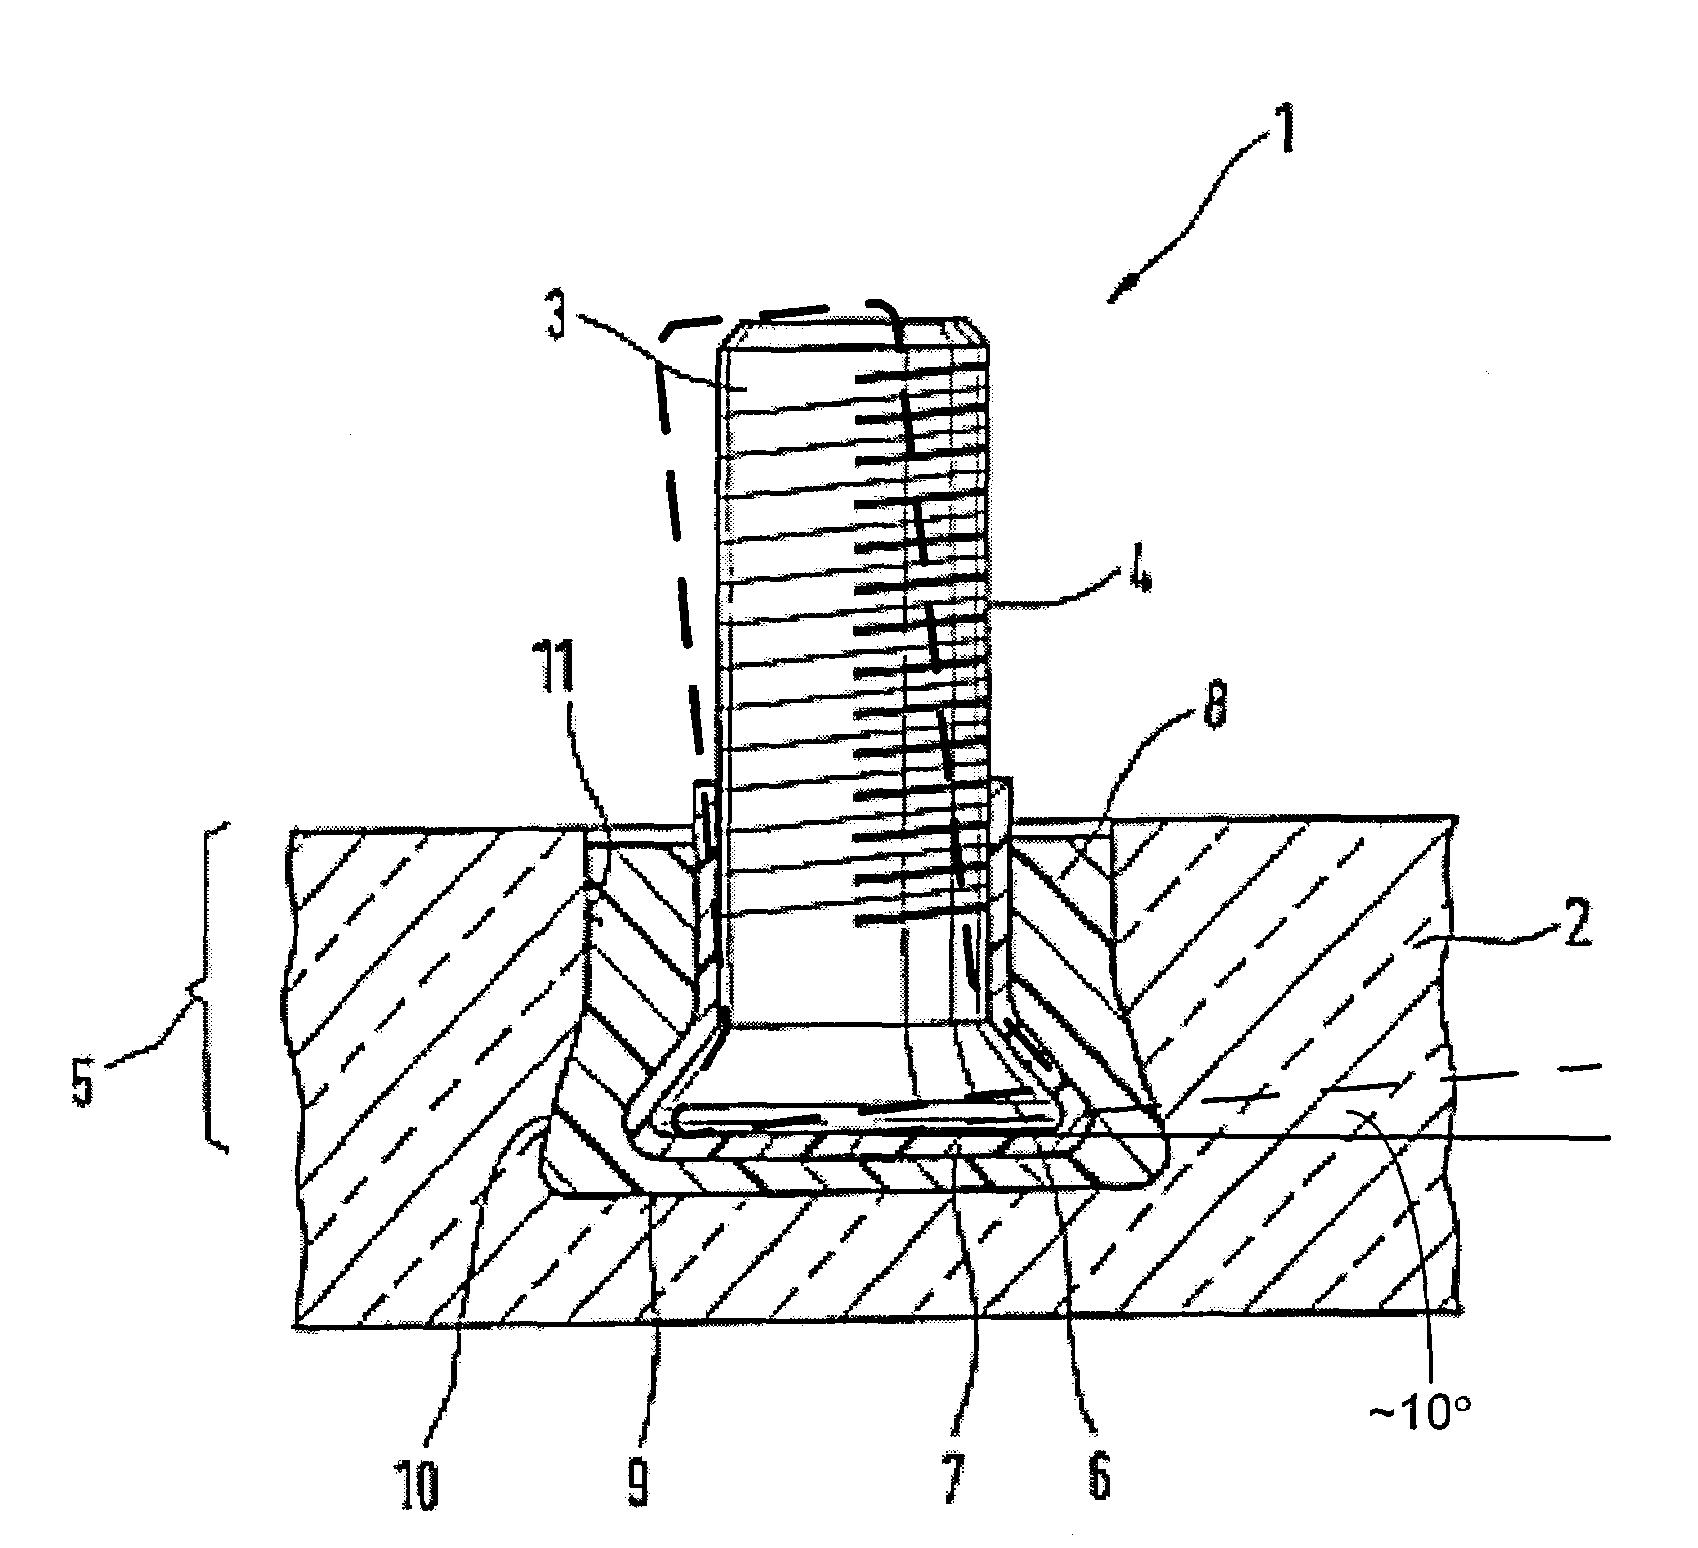 Fixing device for producing an anchoring in panels, especially panels consisting of glass